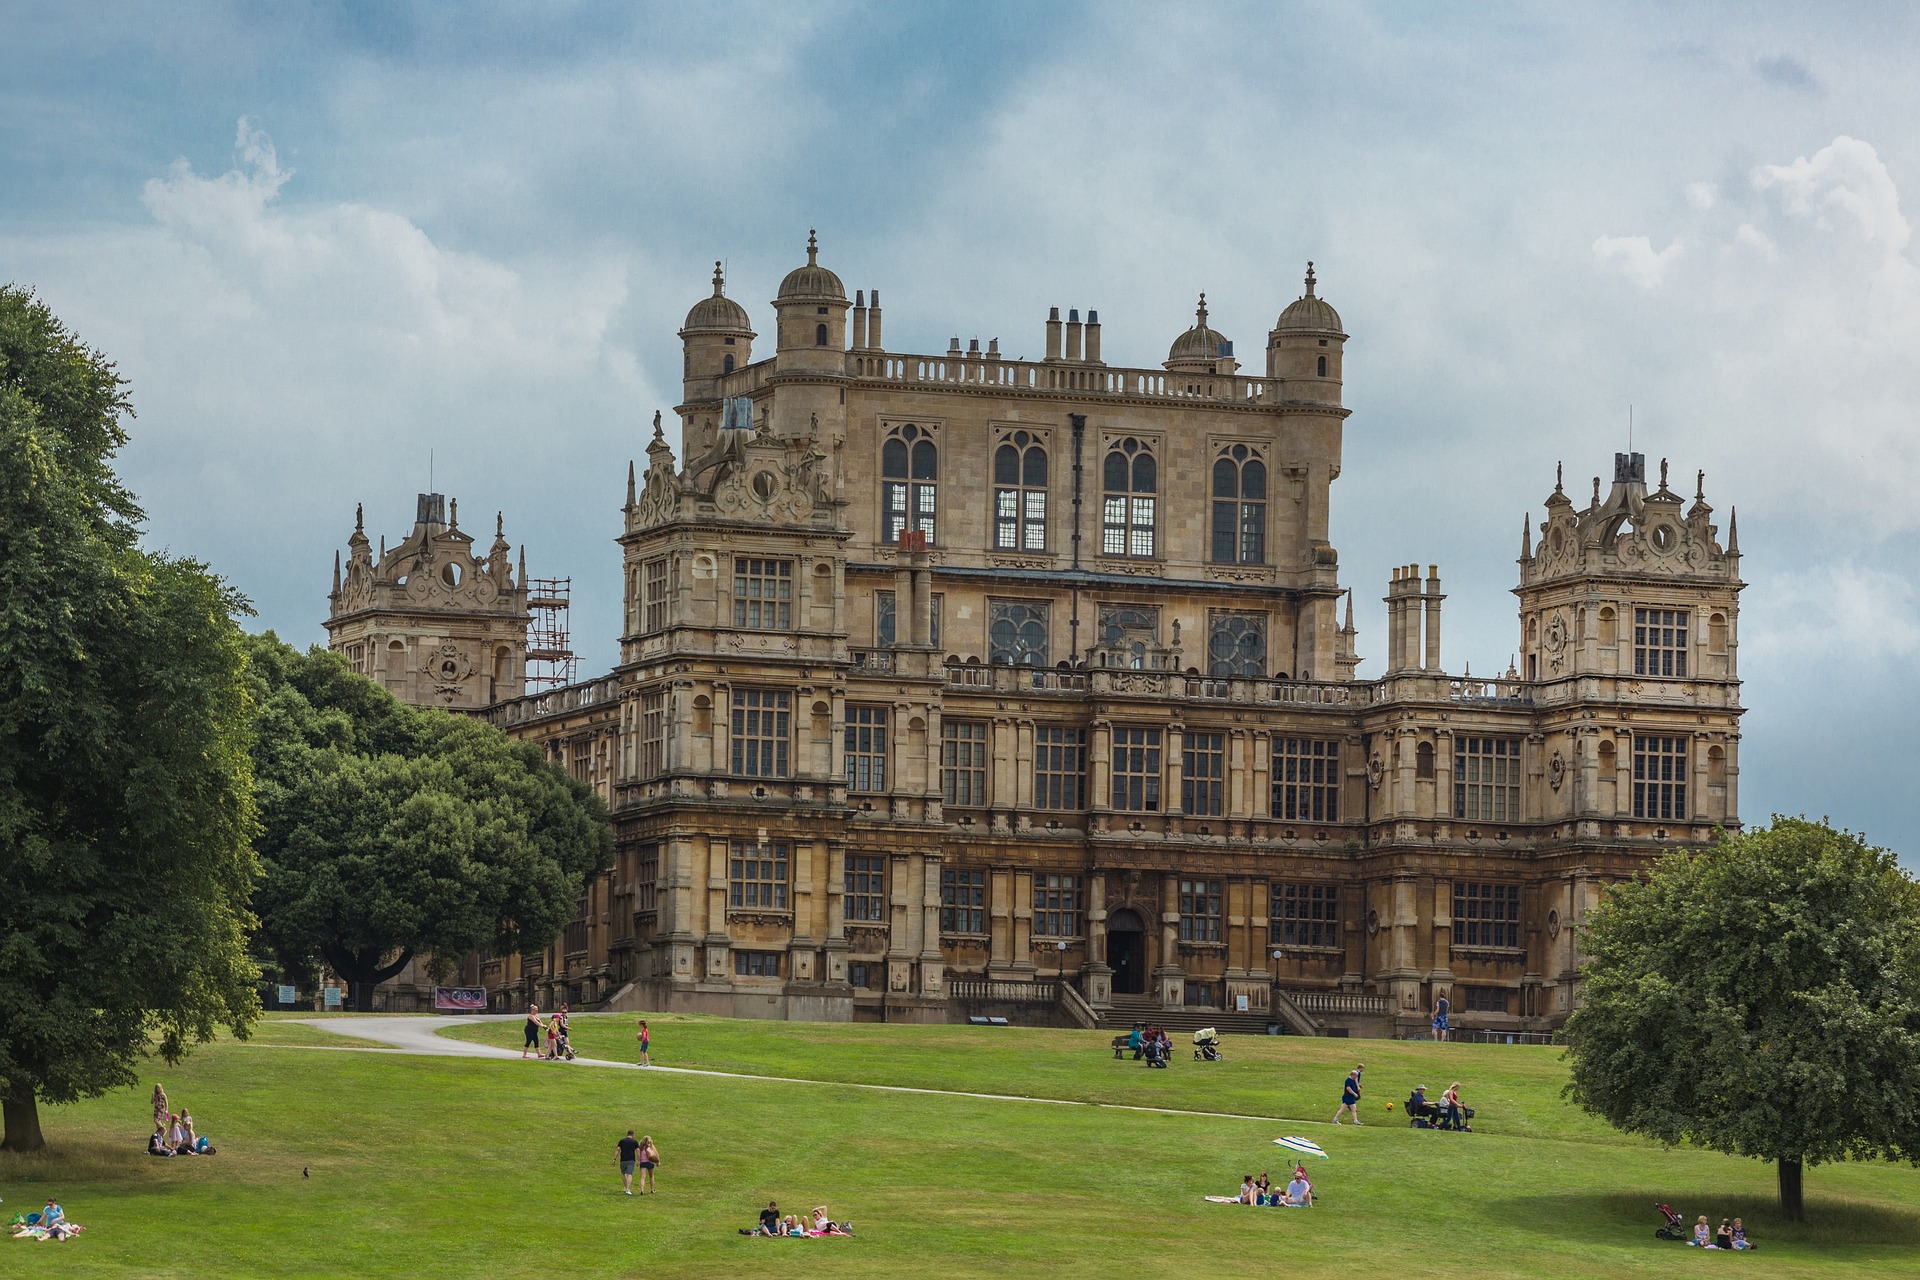 Groups of people sat down outside Wollaton hall on the green lawn.